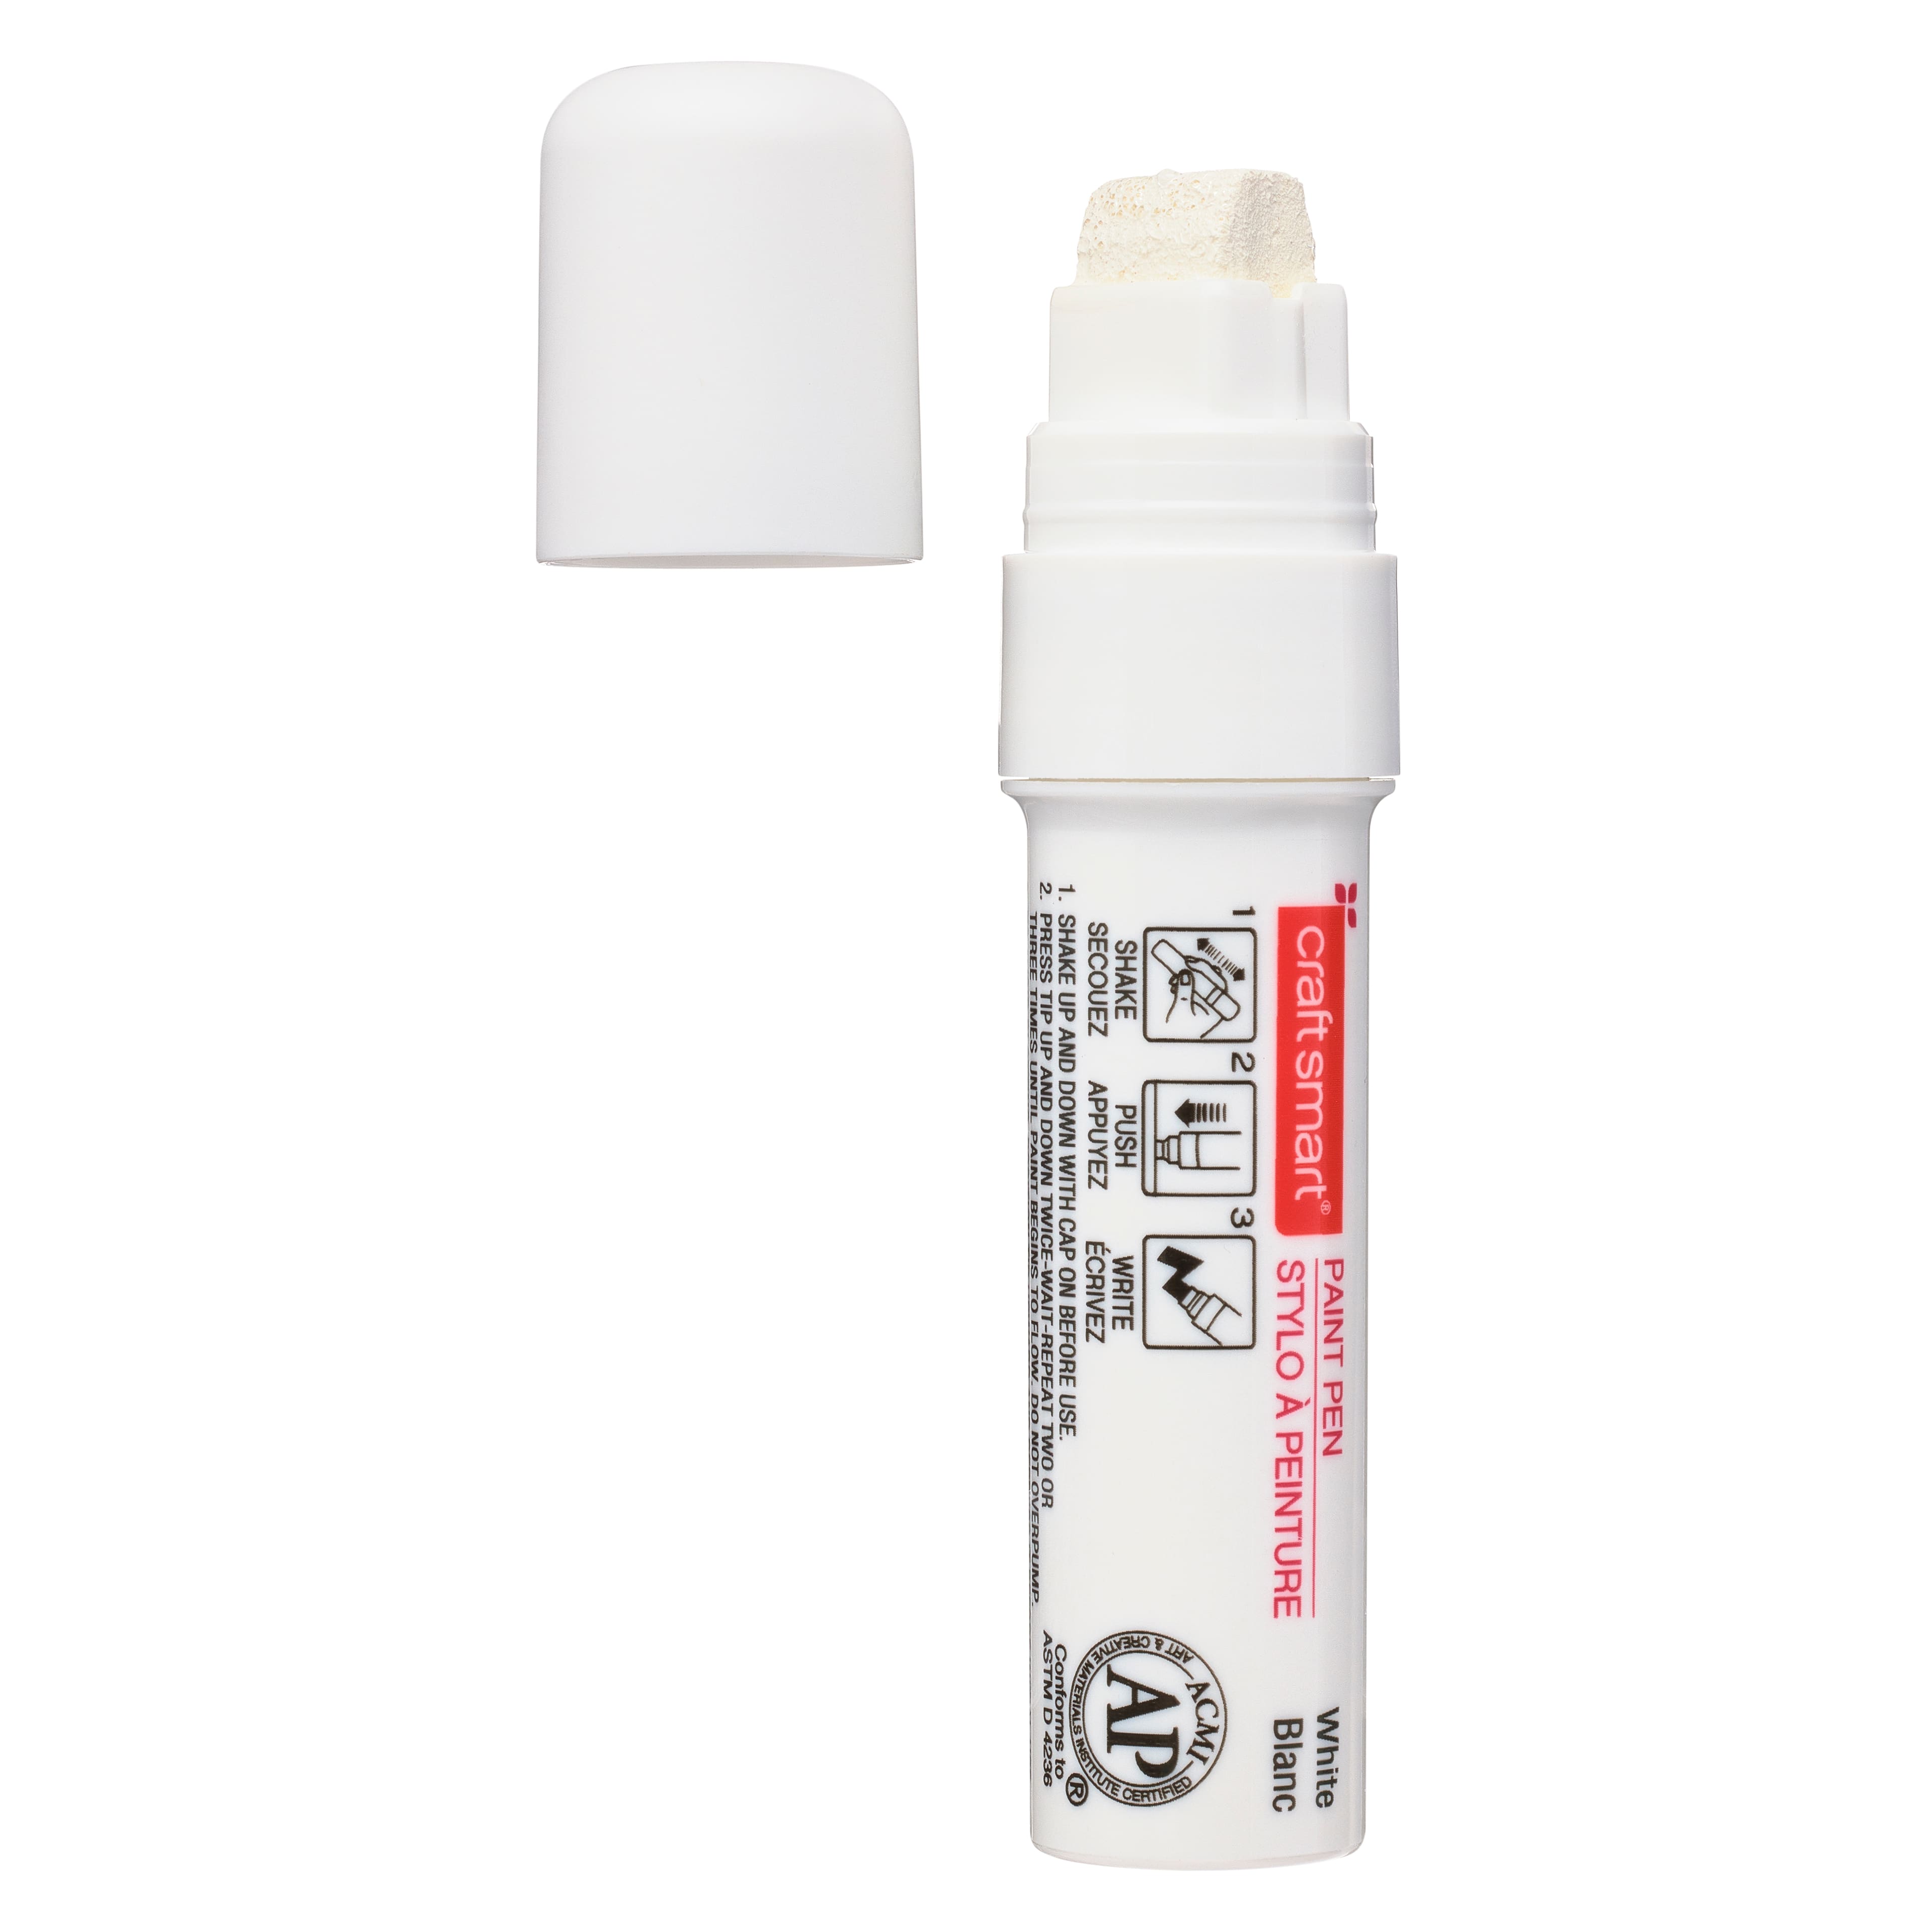 Premium Oil-Based Paint Pens by Craft Smart in White | Michaels